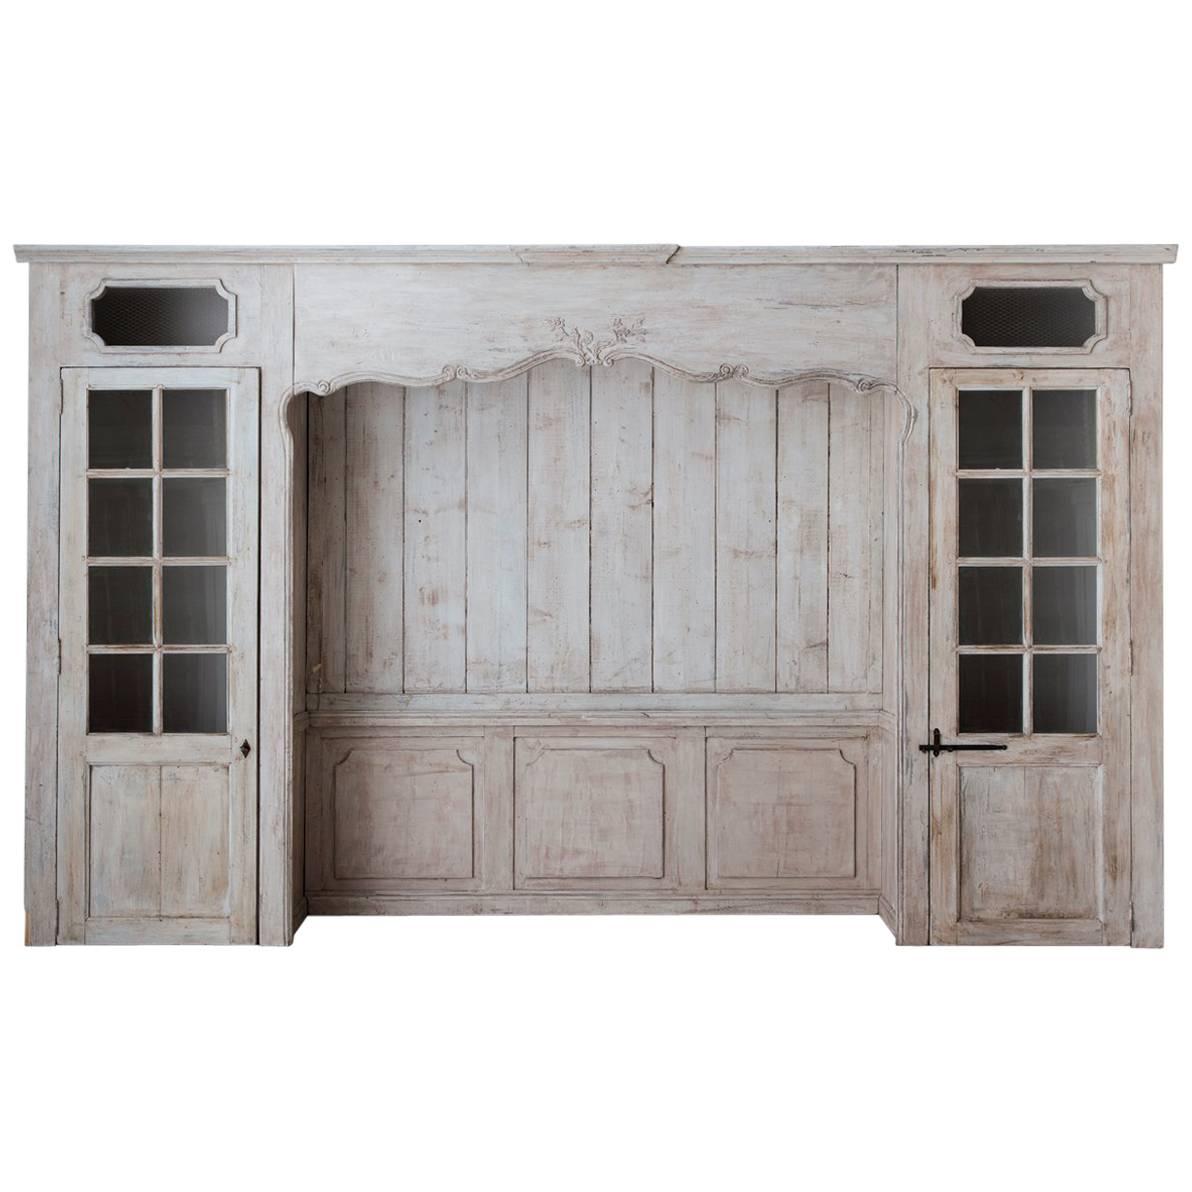 Louis XV Style Architectural Paneling with Recessed Niche and Side Closets